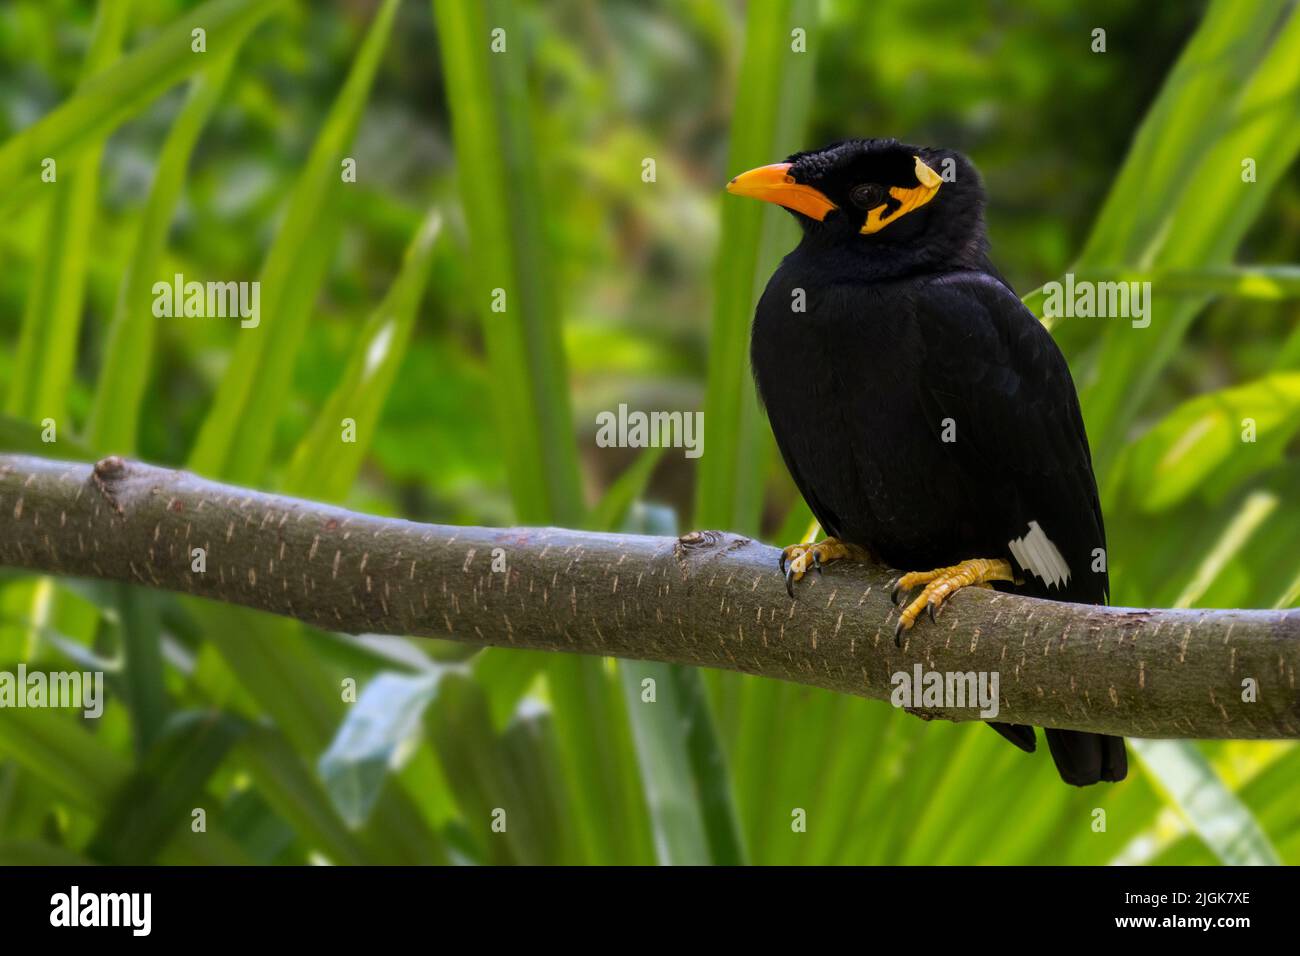 Common hill myna bird (Gracula religiosa / Gracula indica) native to the hill regions of South Asia and Southeast Asia Stock Photo